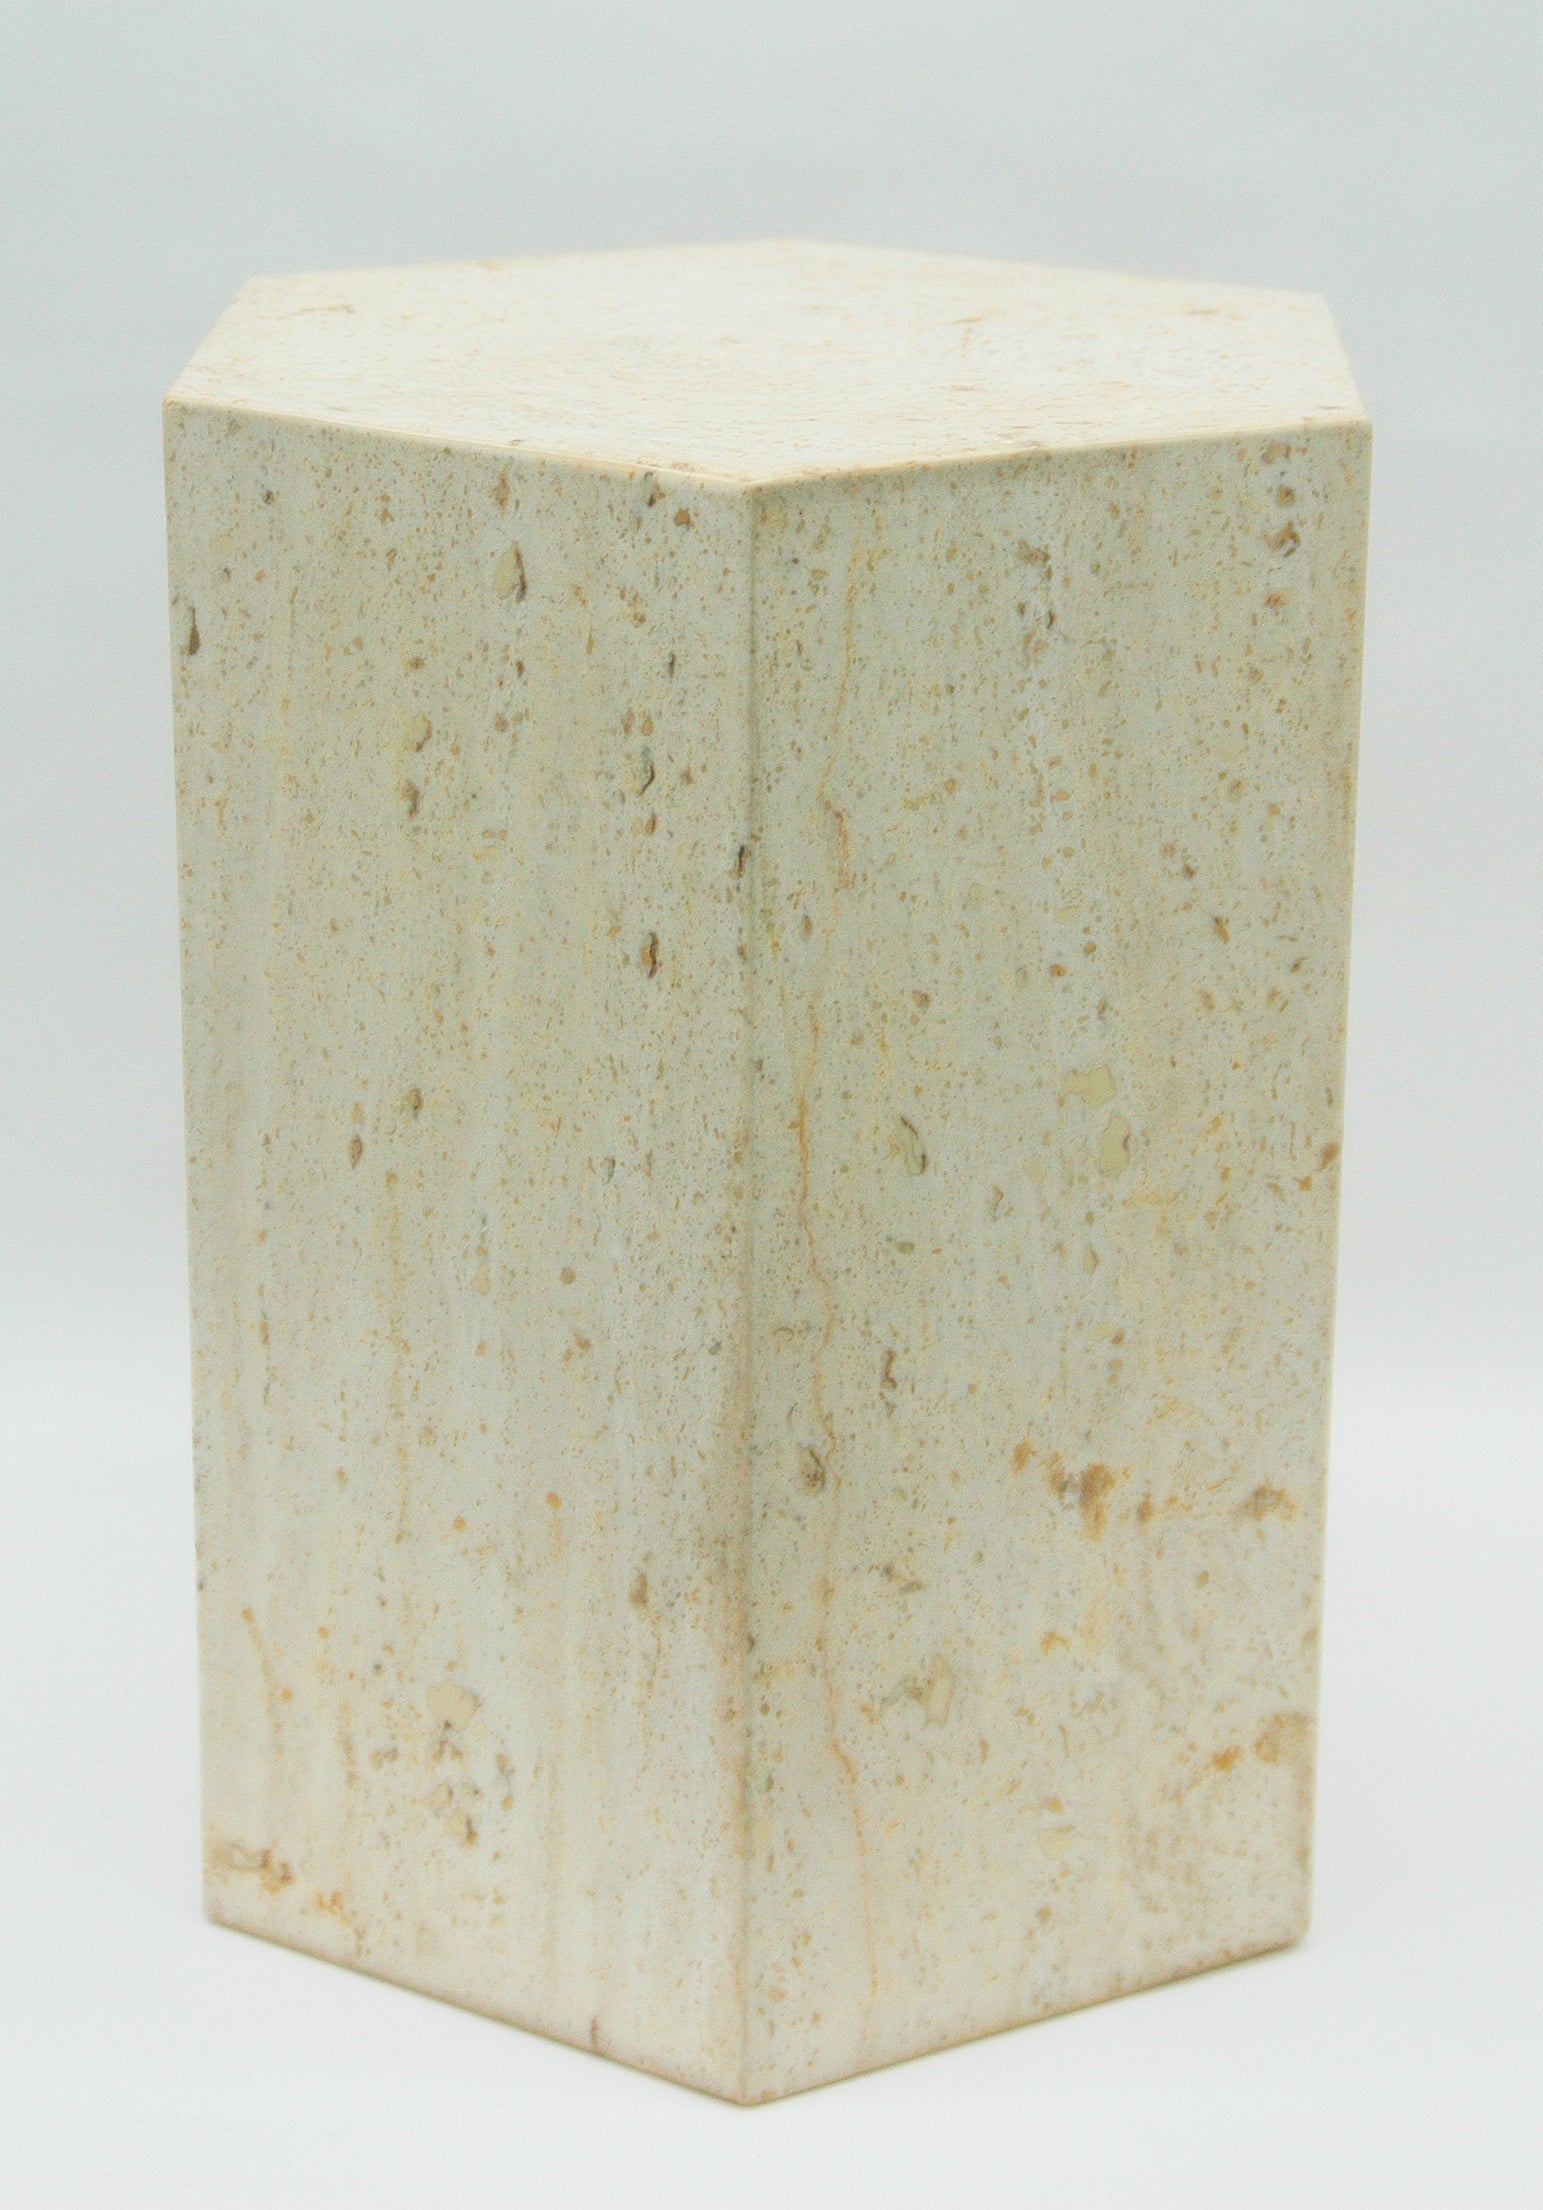 Pace Collection Travertine Hexagonal Pedestal or Side Table